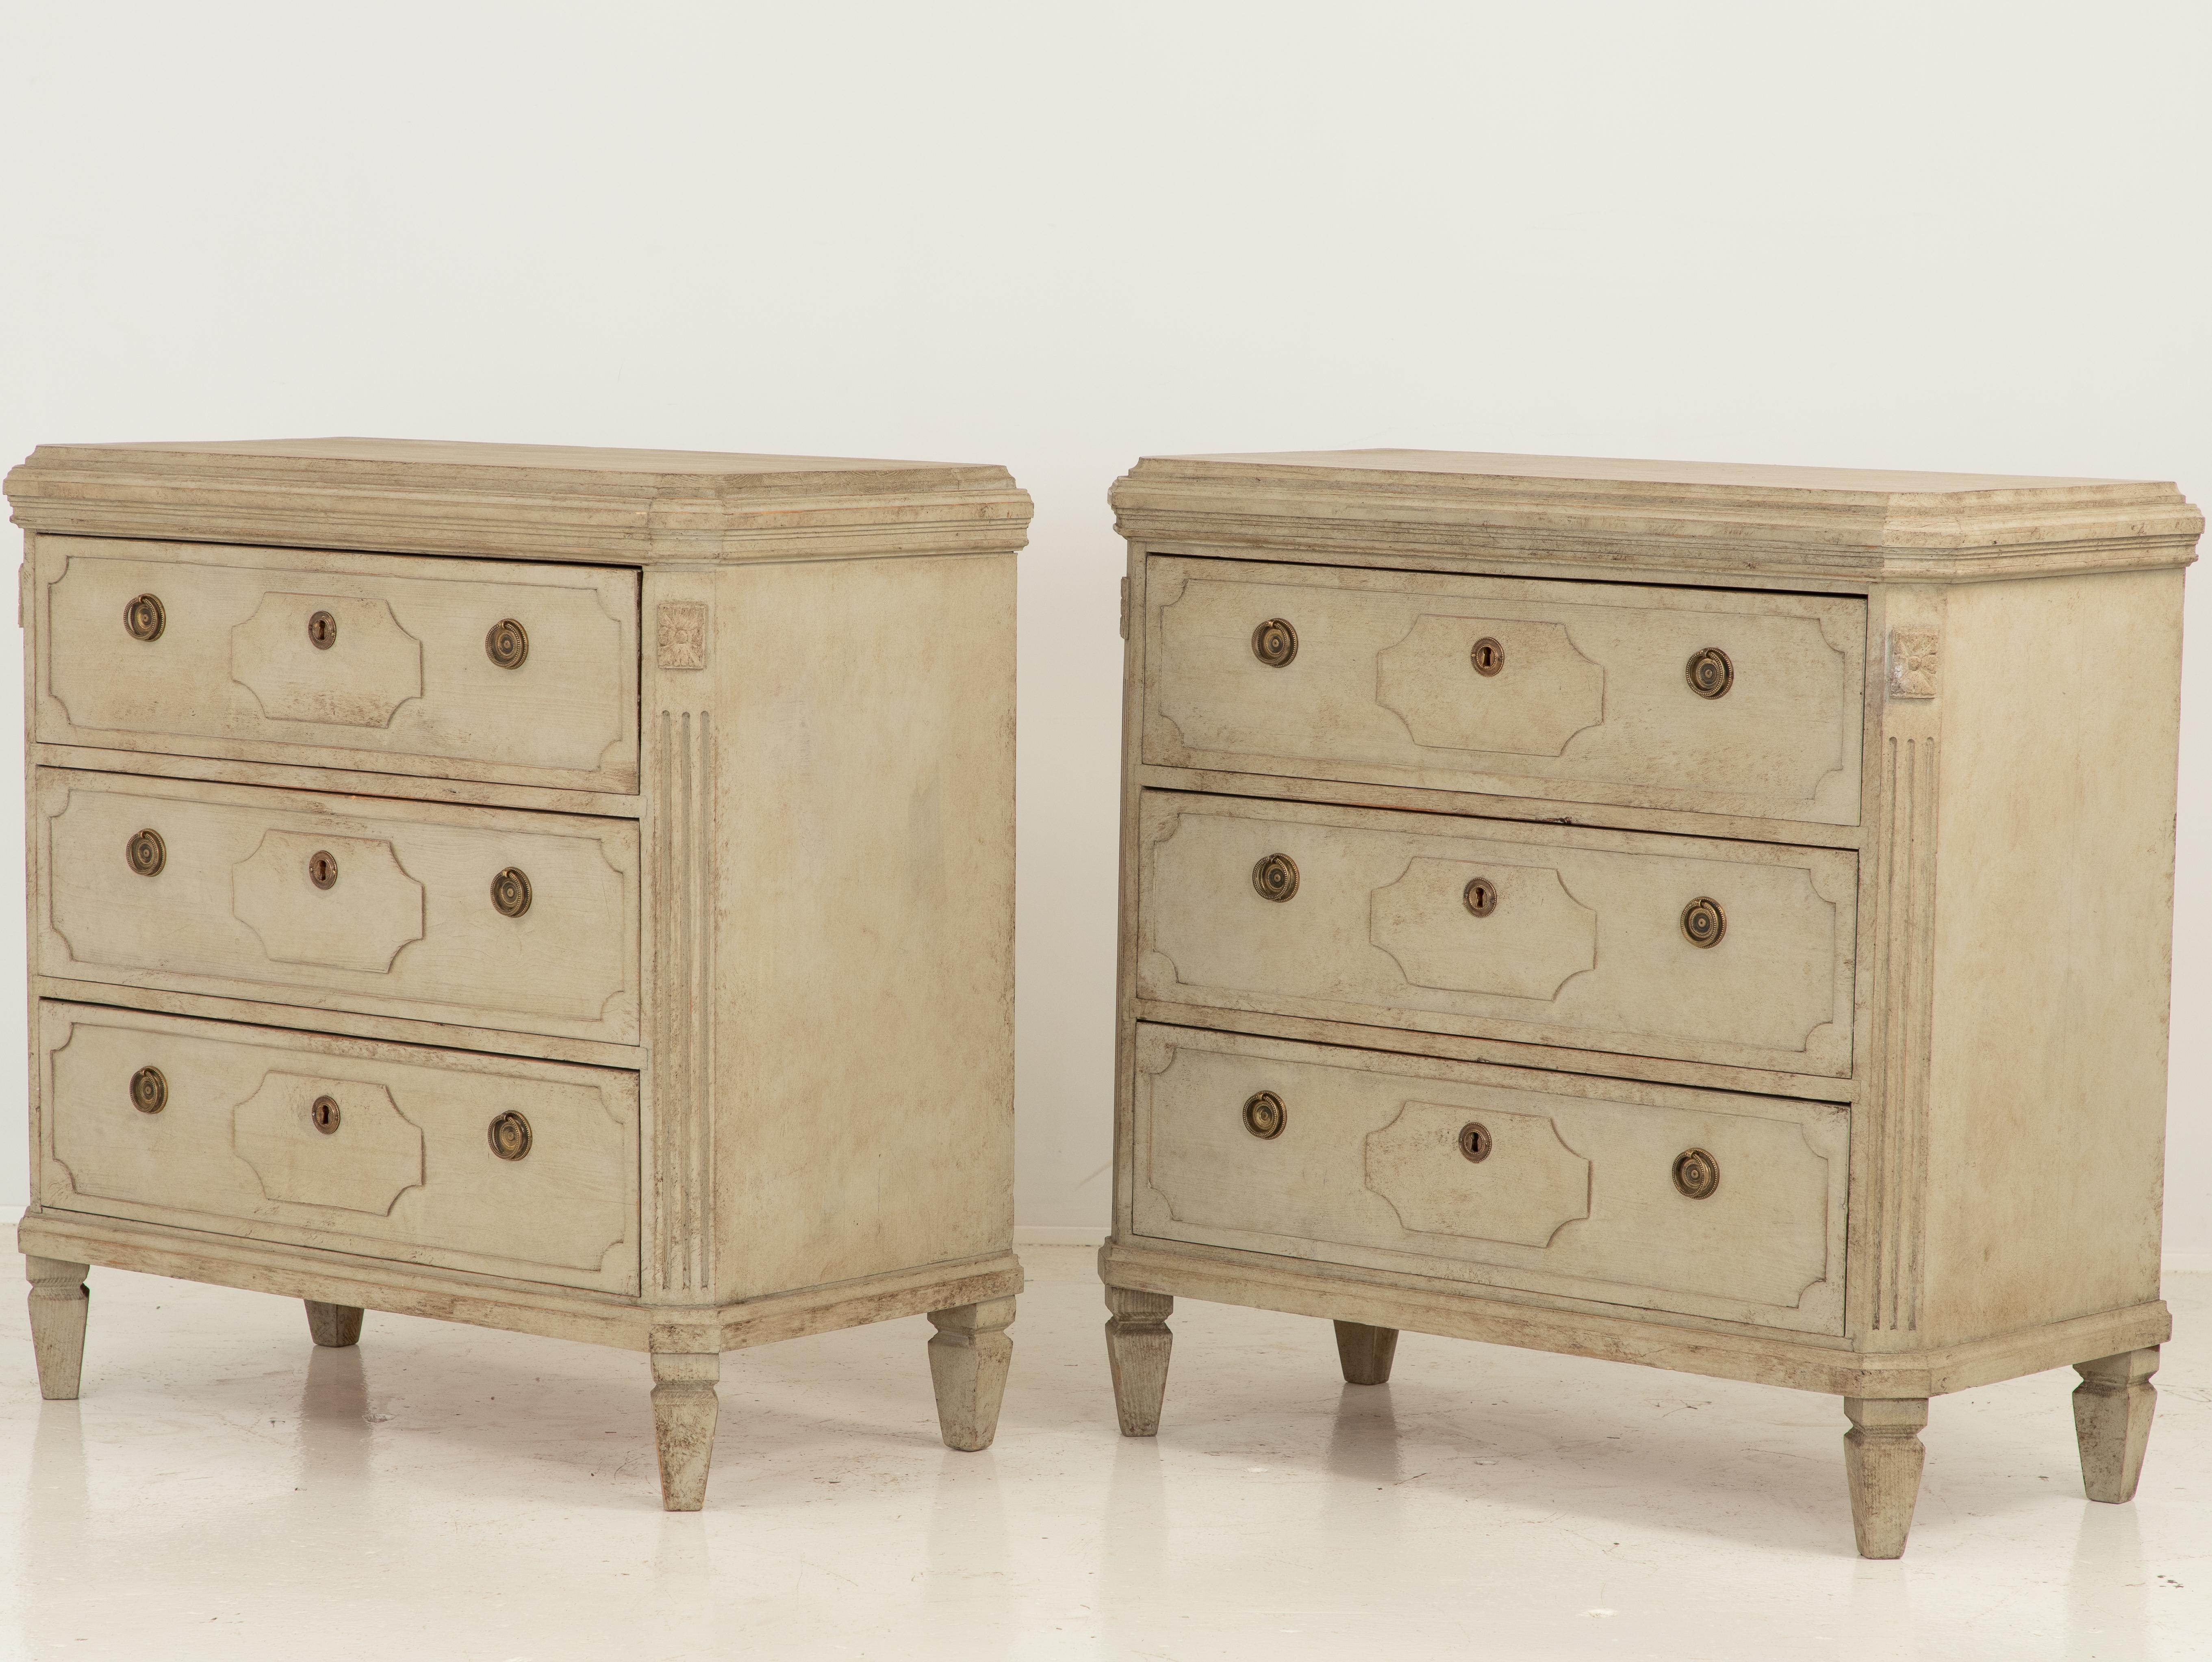 An early 20th century pair of Swedish Gustavian style chests of drawers. Each commode has three drawers with brass ring pulls and escutcheons. Each drawer has beautifully carved lozenges. Canted corner with medallions and reeded detail on the